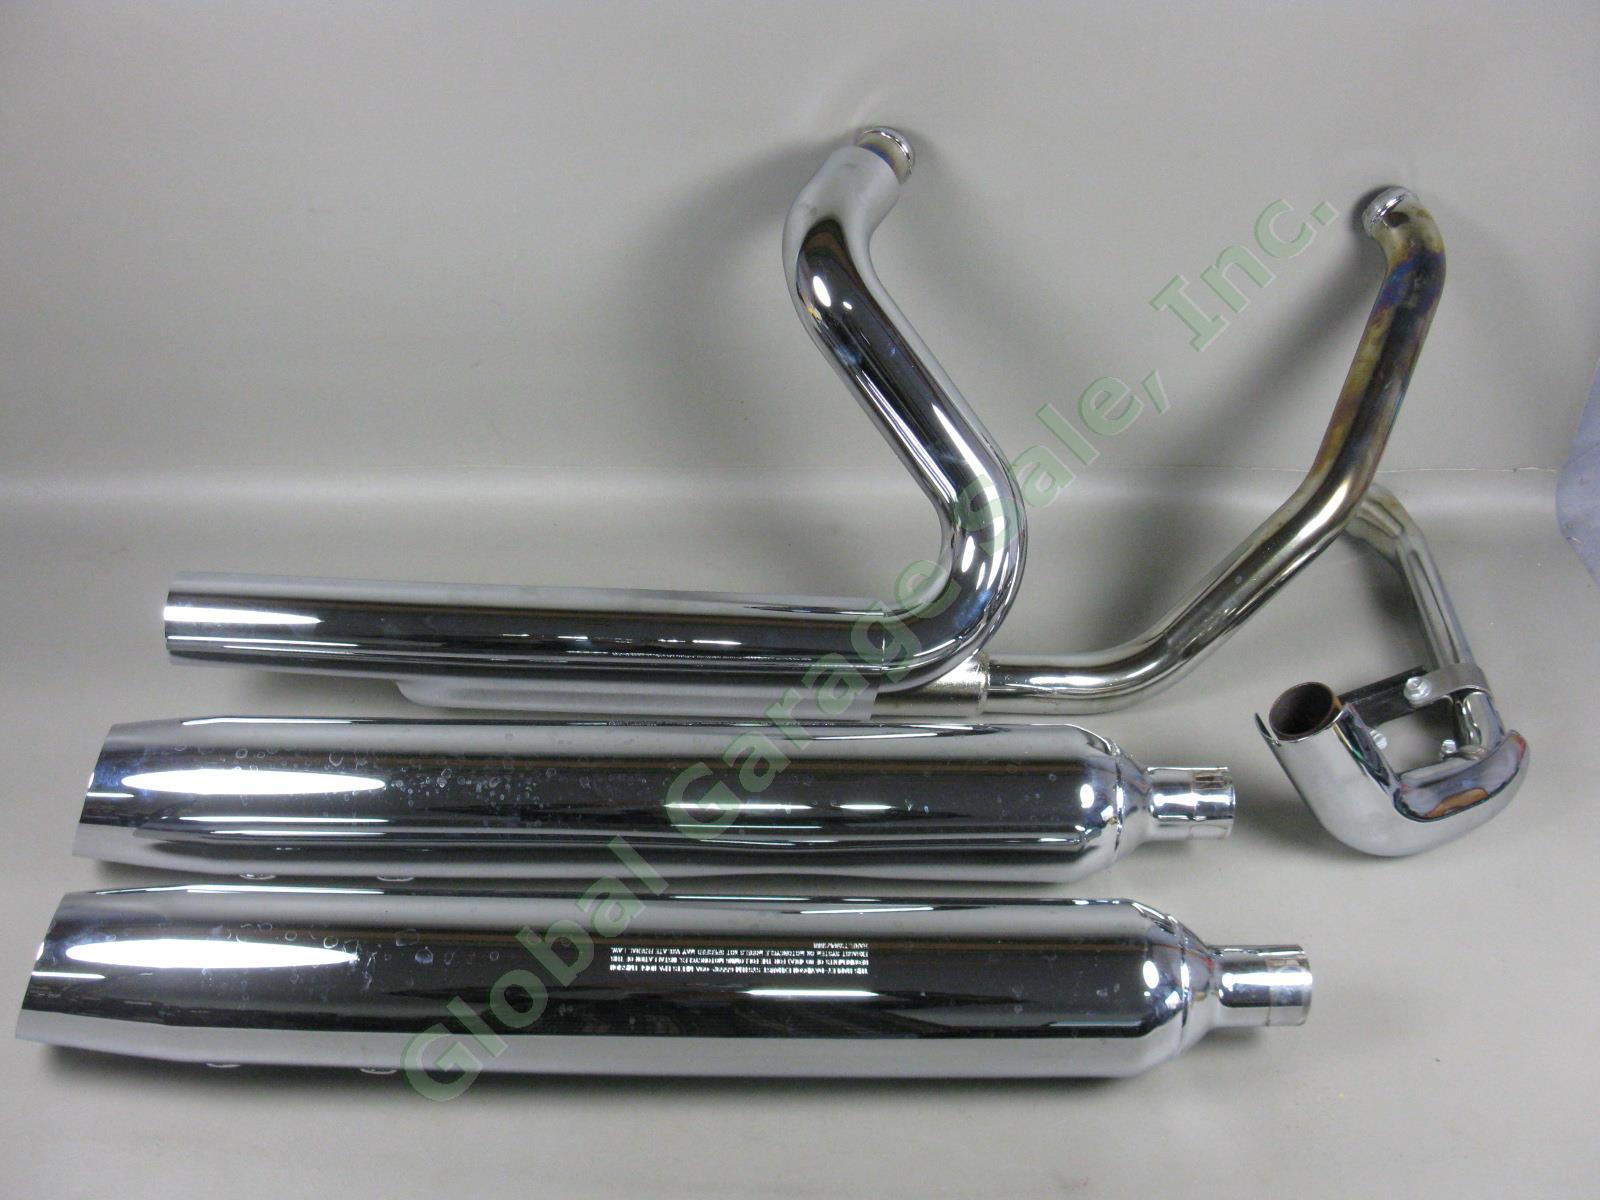 2013 Harley Davidson Street Glide Touring Exhaust Pipes + Slip-Ons + Heat Shield